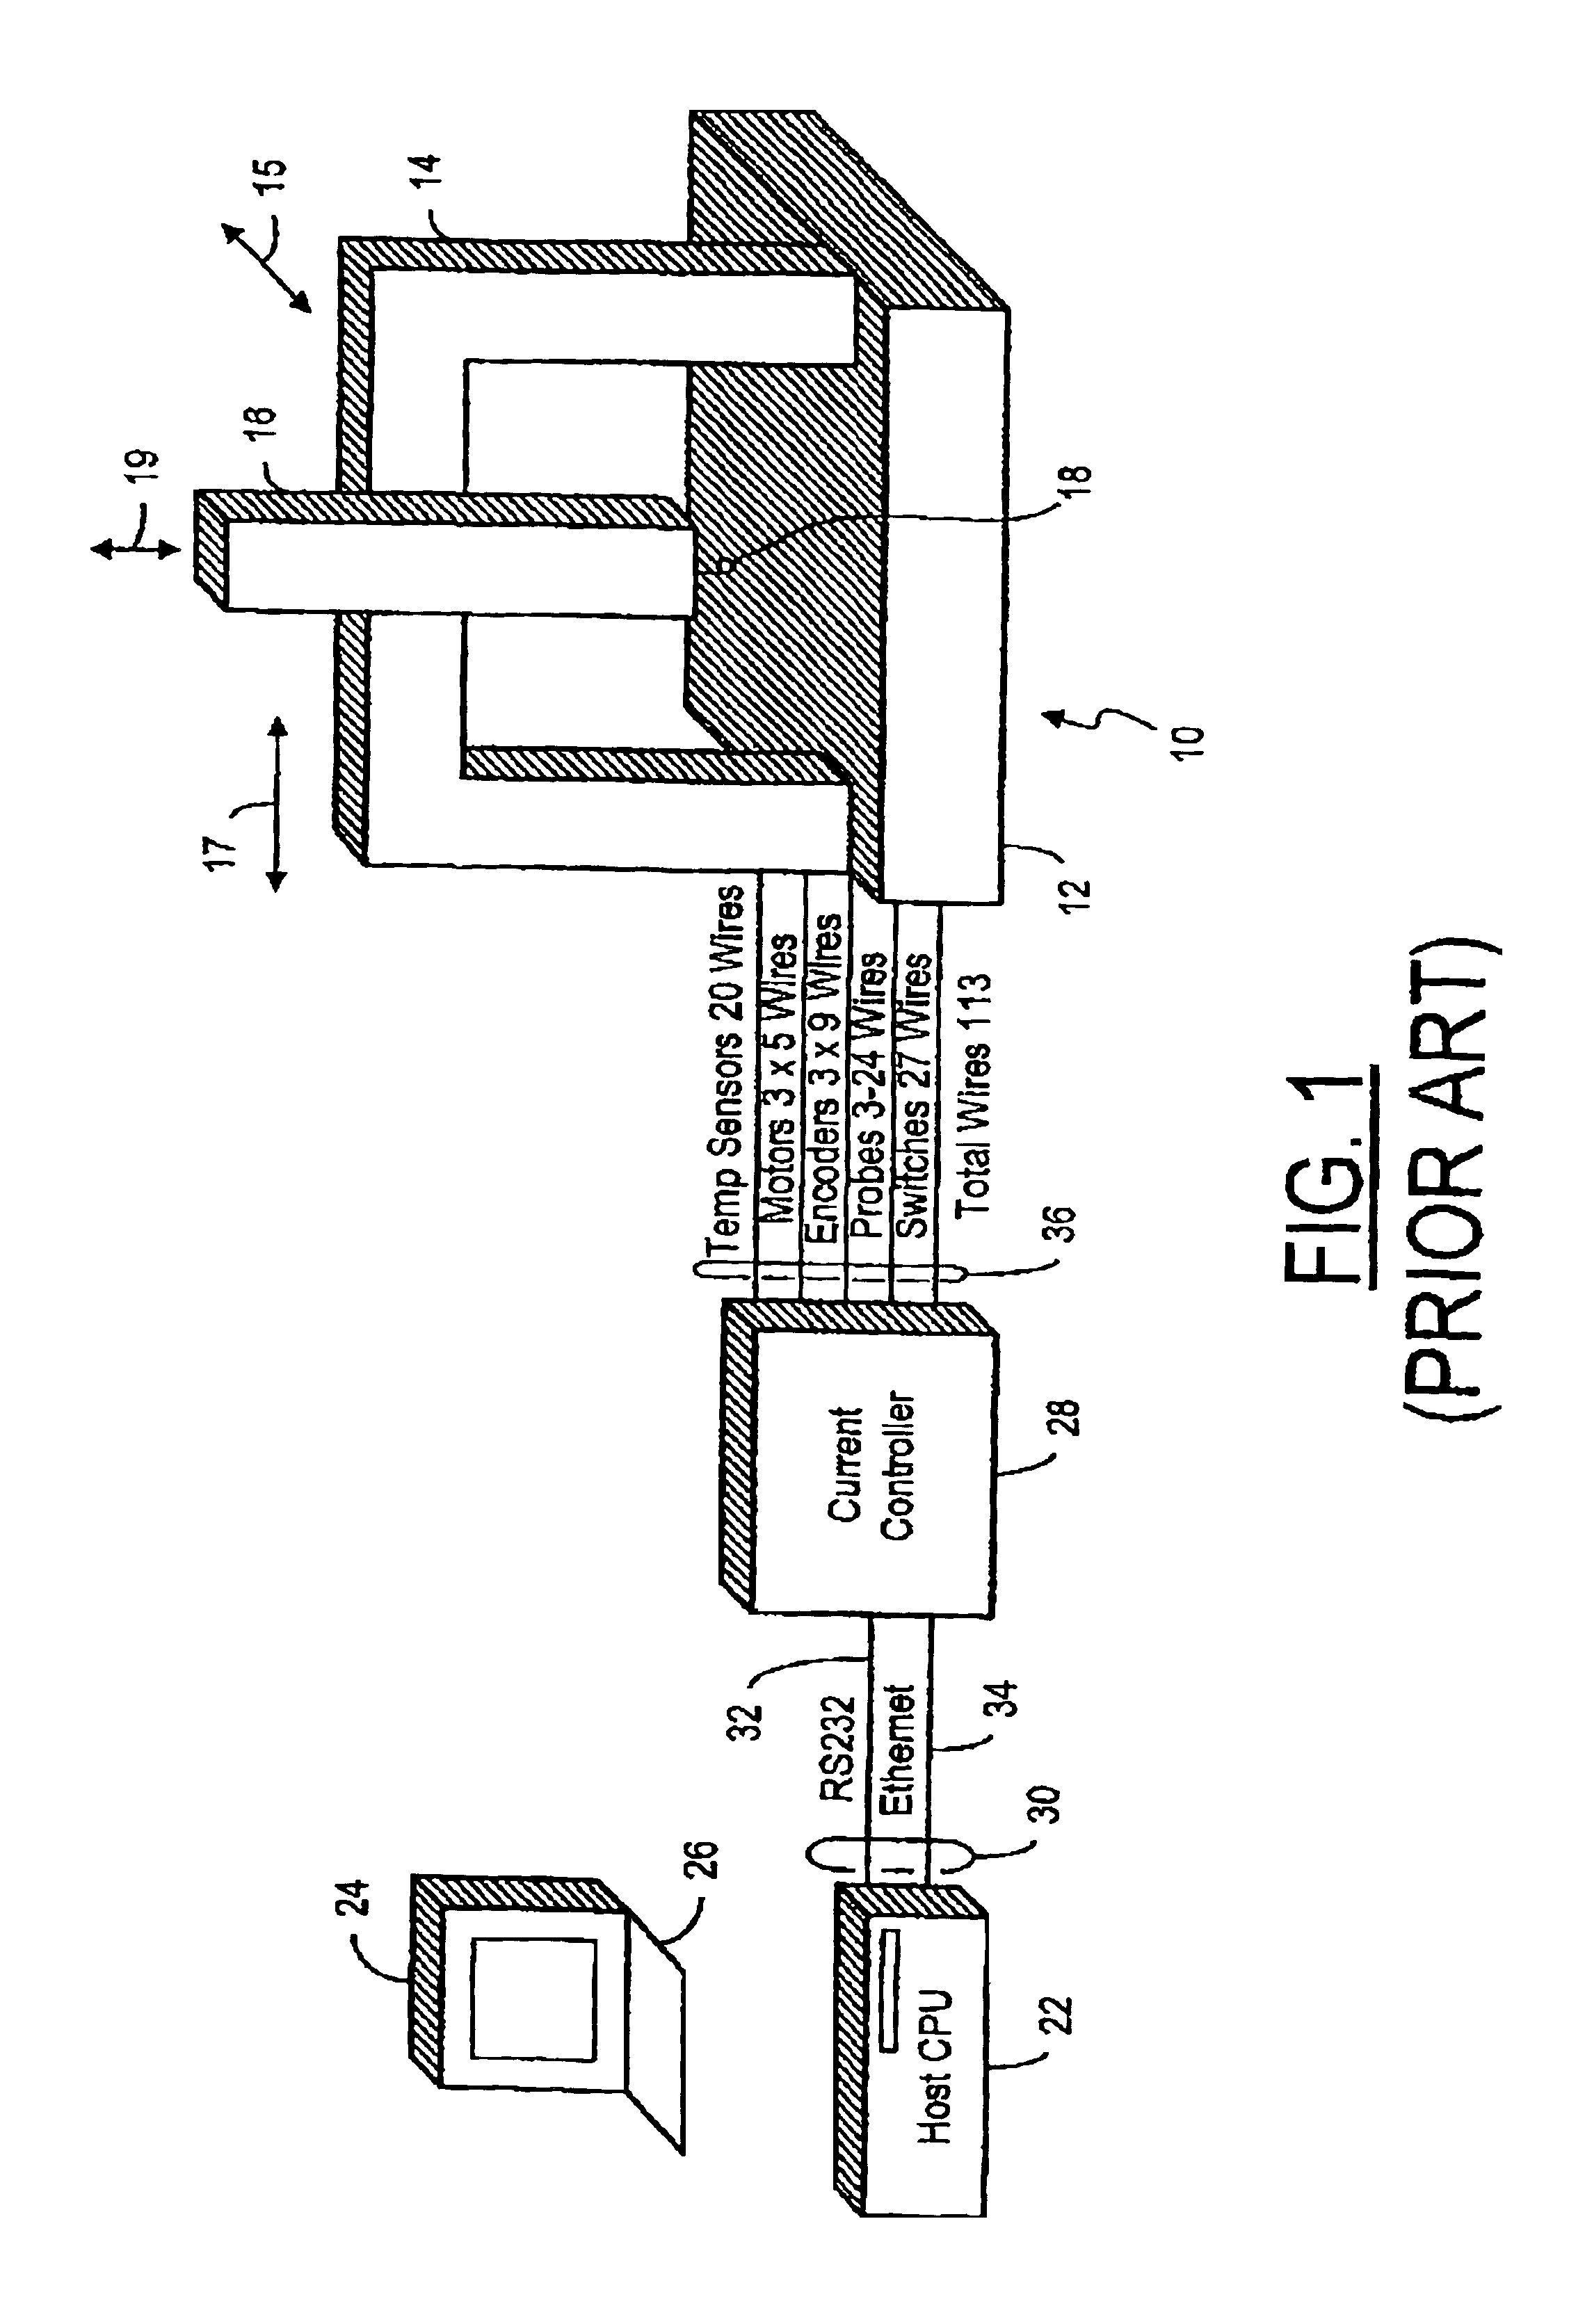 Communication method and common control bus interconnecting a controller and a precision measurement assembly